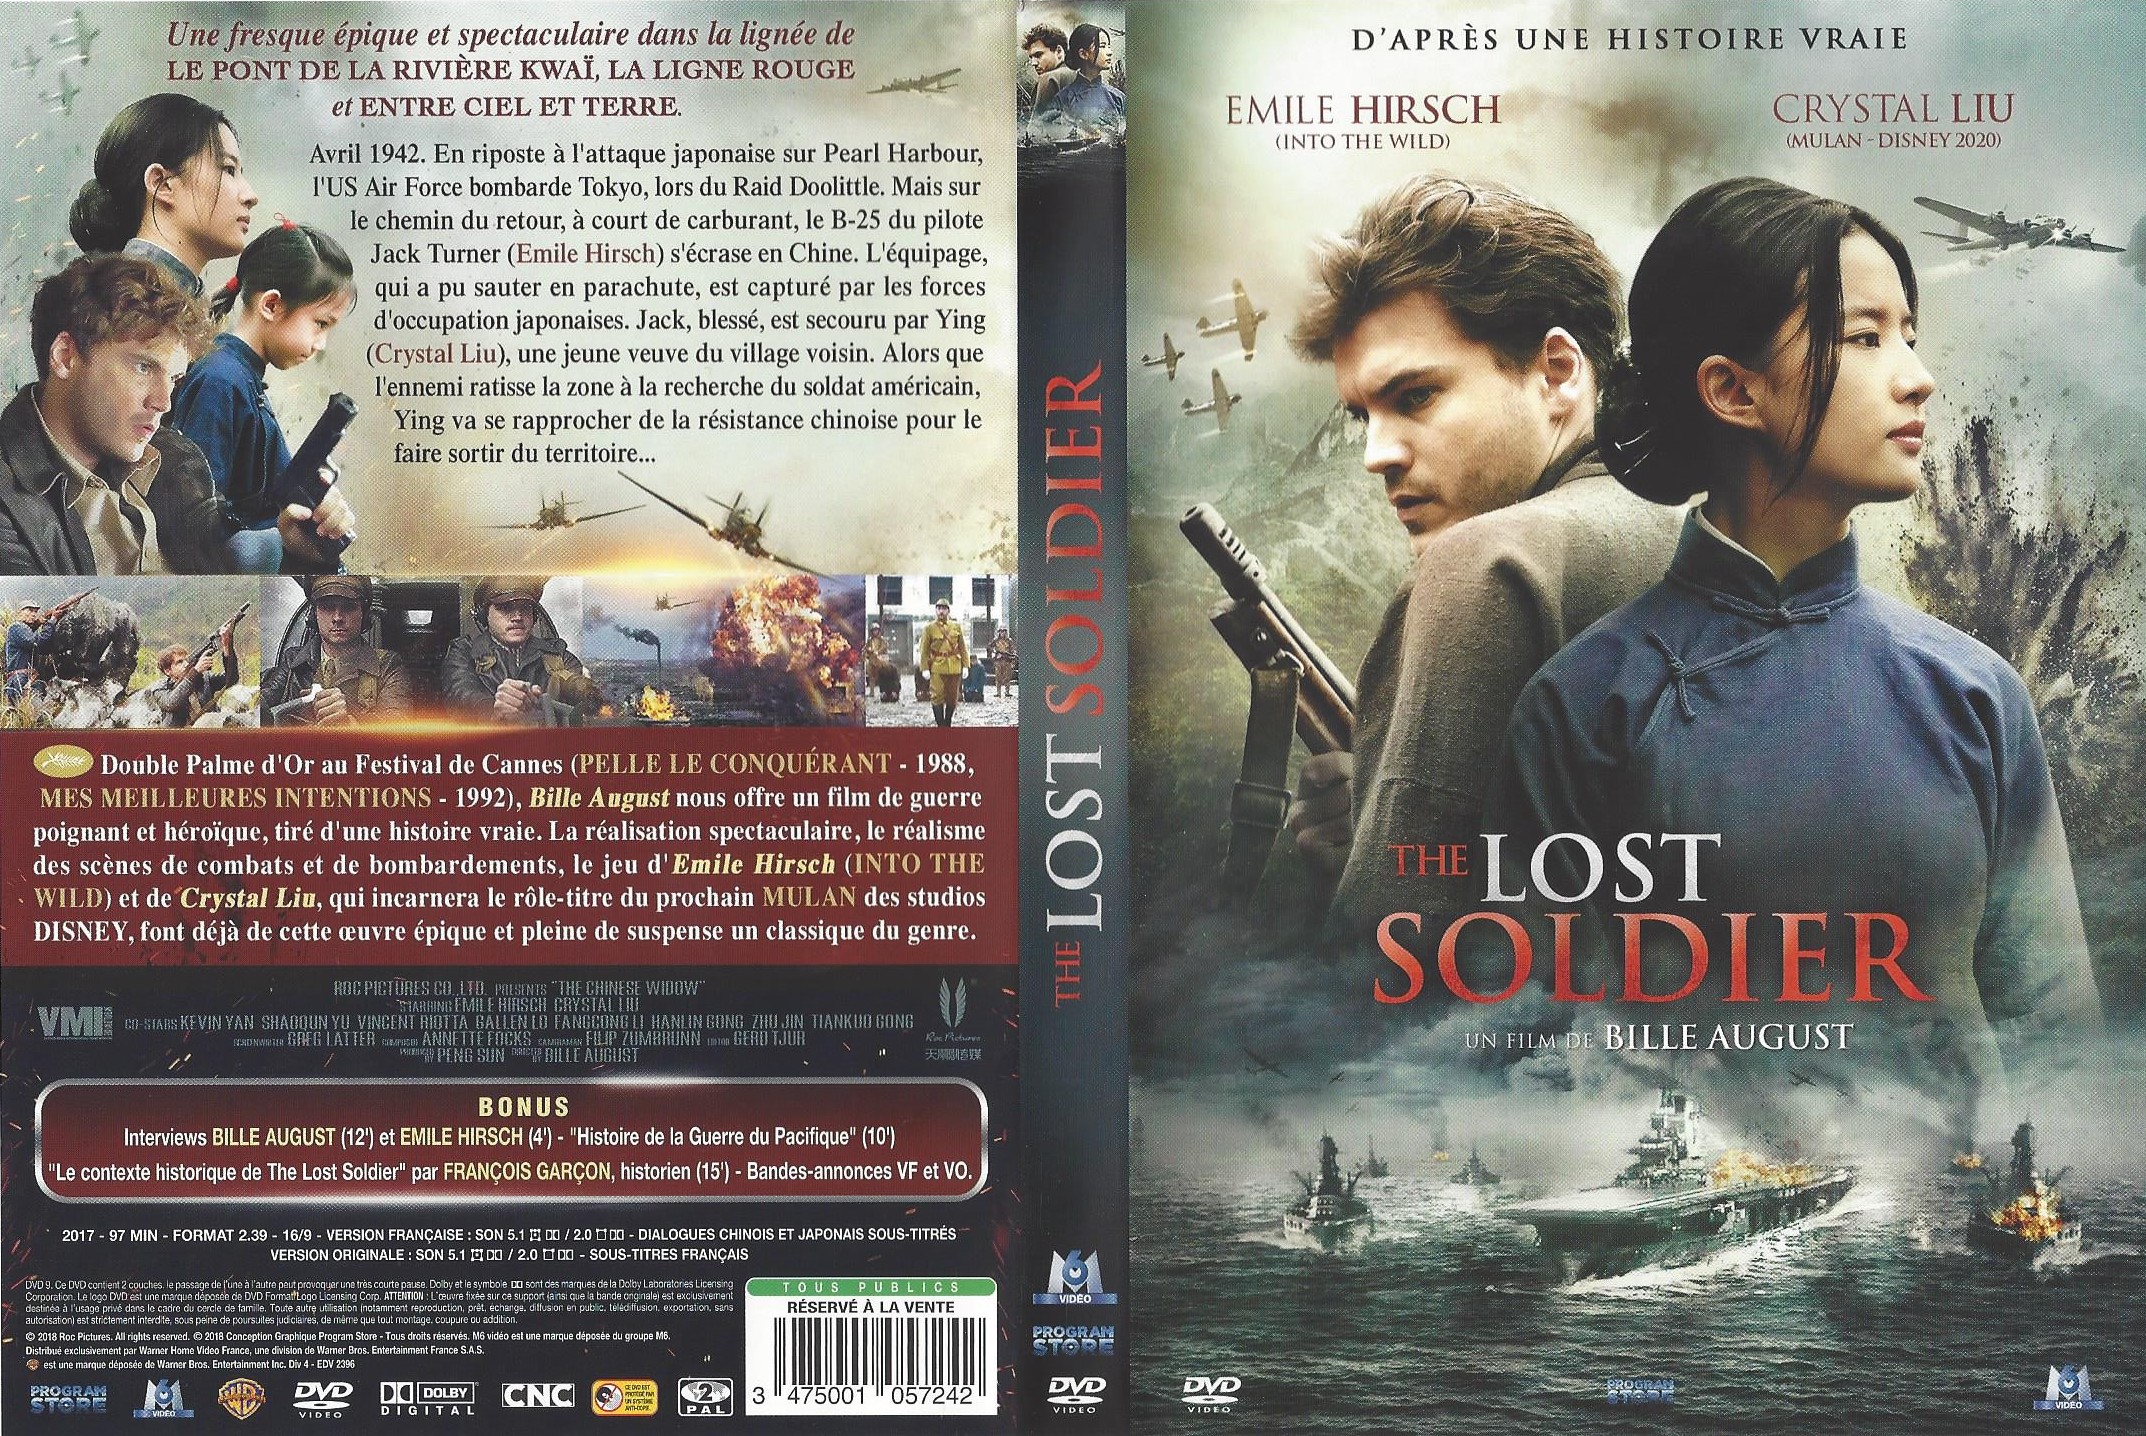 Jaquette DVD The Lost Soldier